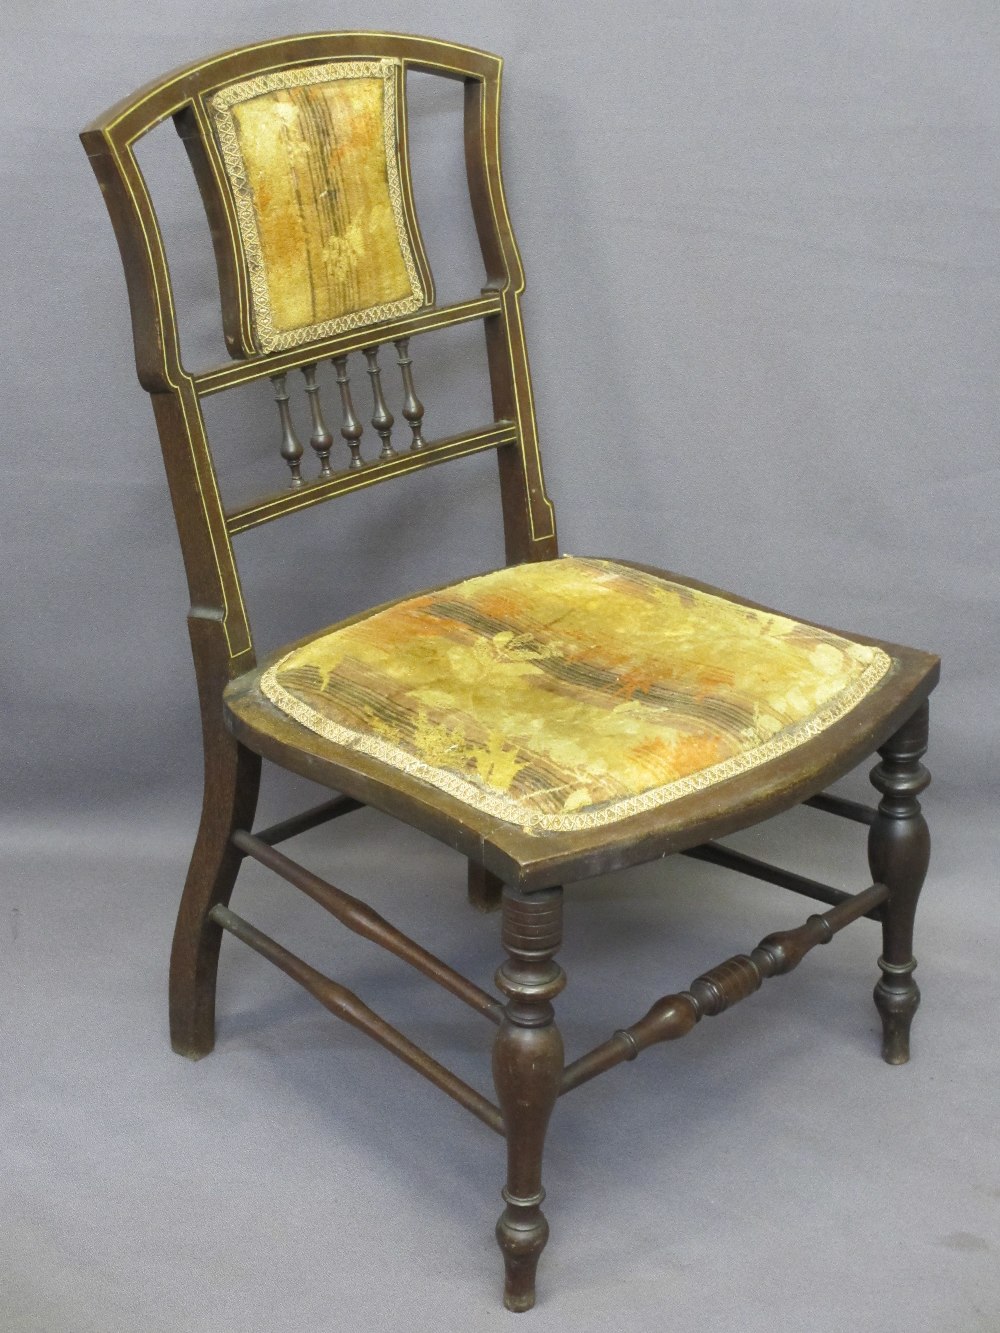 TUB CHAIRS, two similar, one with inlaid garland detail and another similar era salon chair - Image 4 of 4